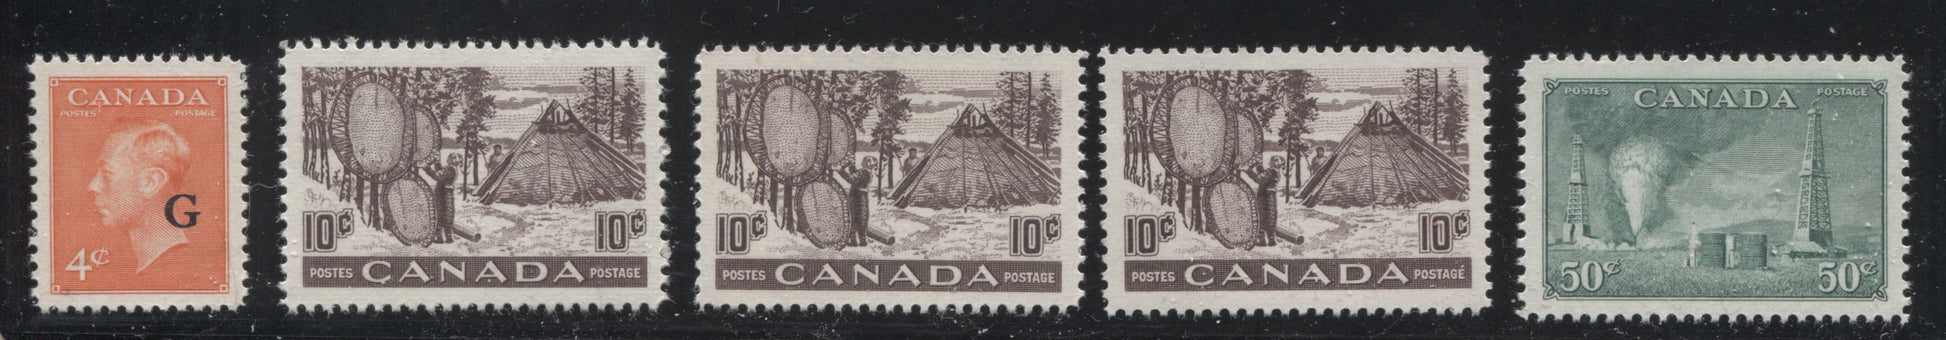 Canada #284/310 & O12/O29 1950-1953 Postes-Postage Issue - Specialized Lot of 57 VF NH Stamps Brixton Chrome 